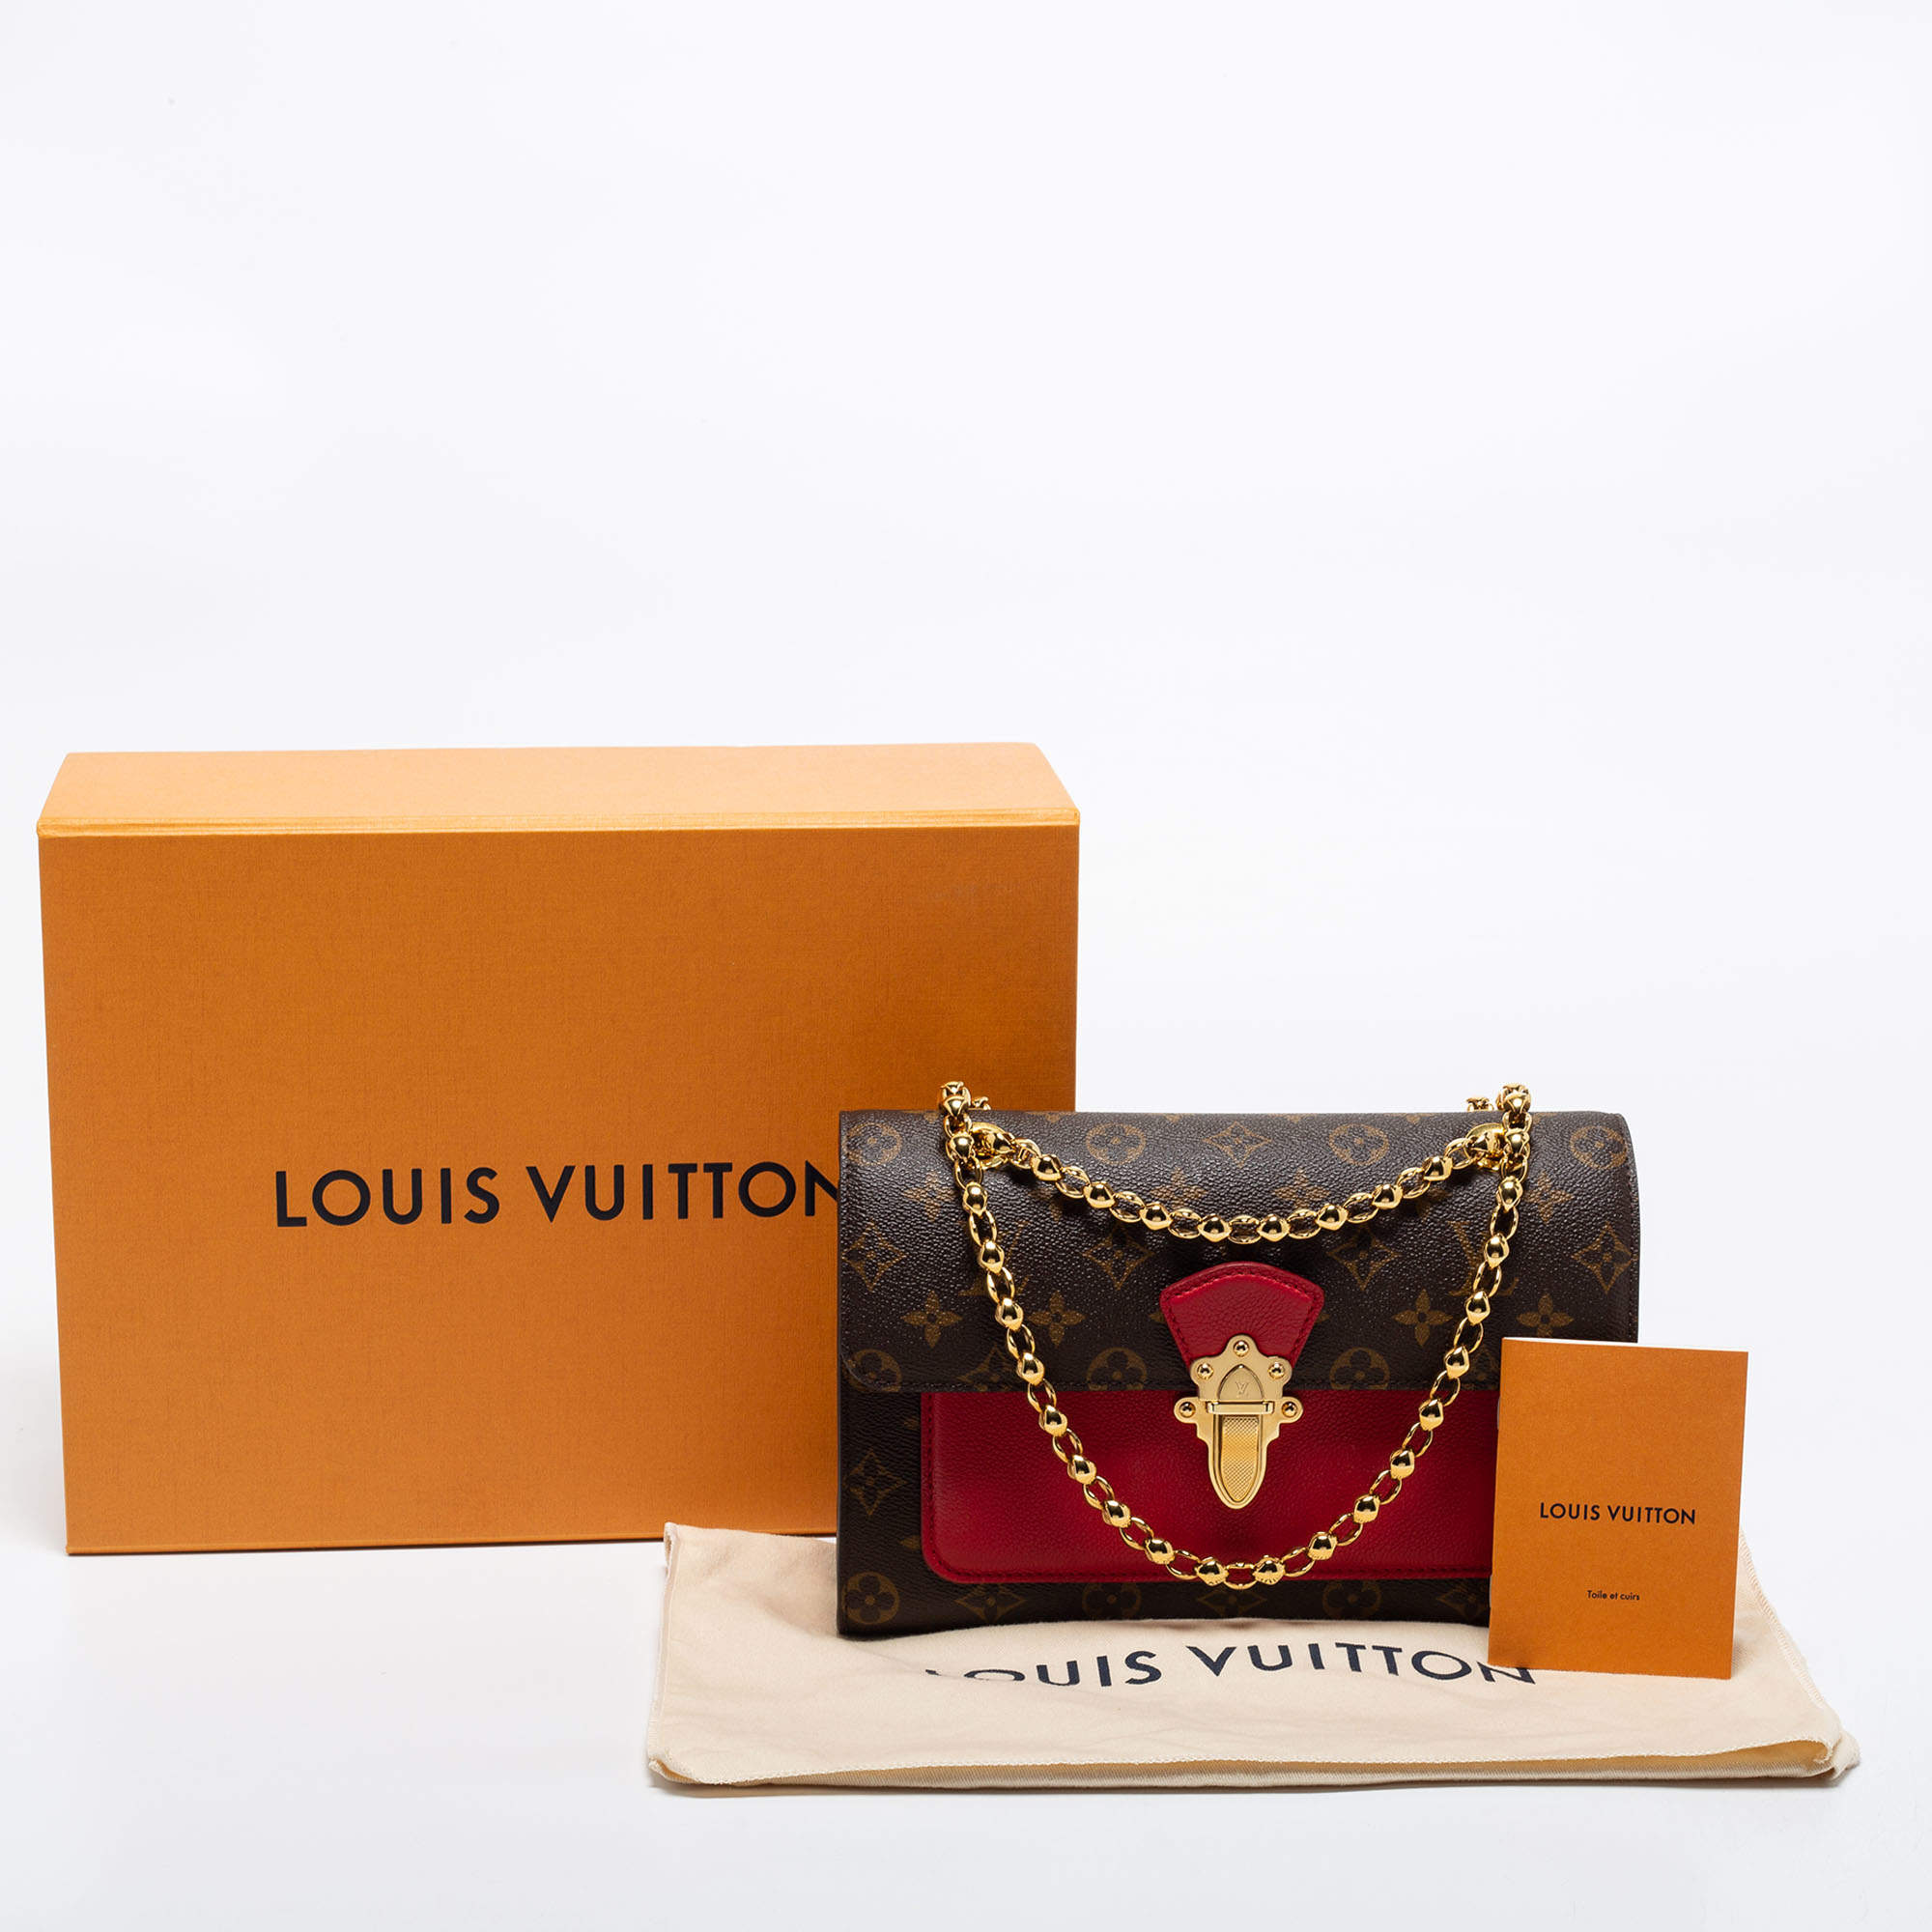 Victoire leather handbag Louis Vuitton Red in Leather - 21288793